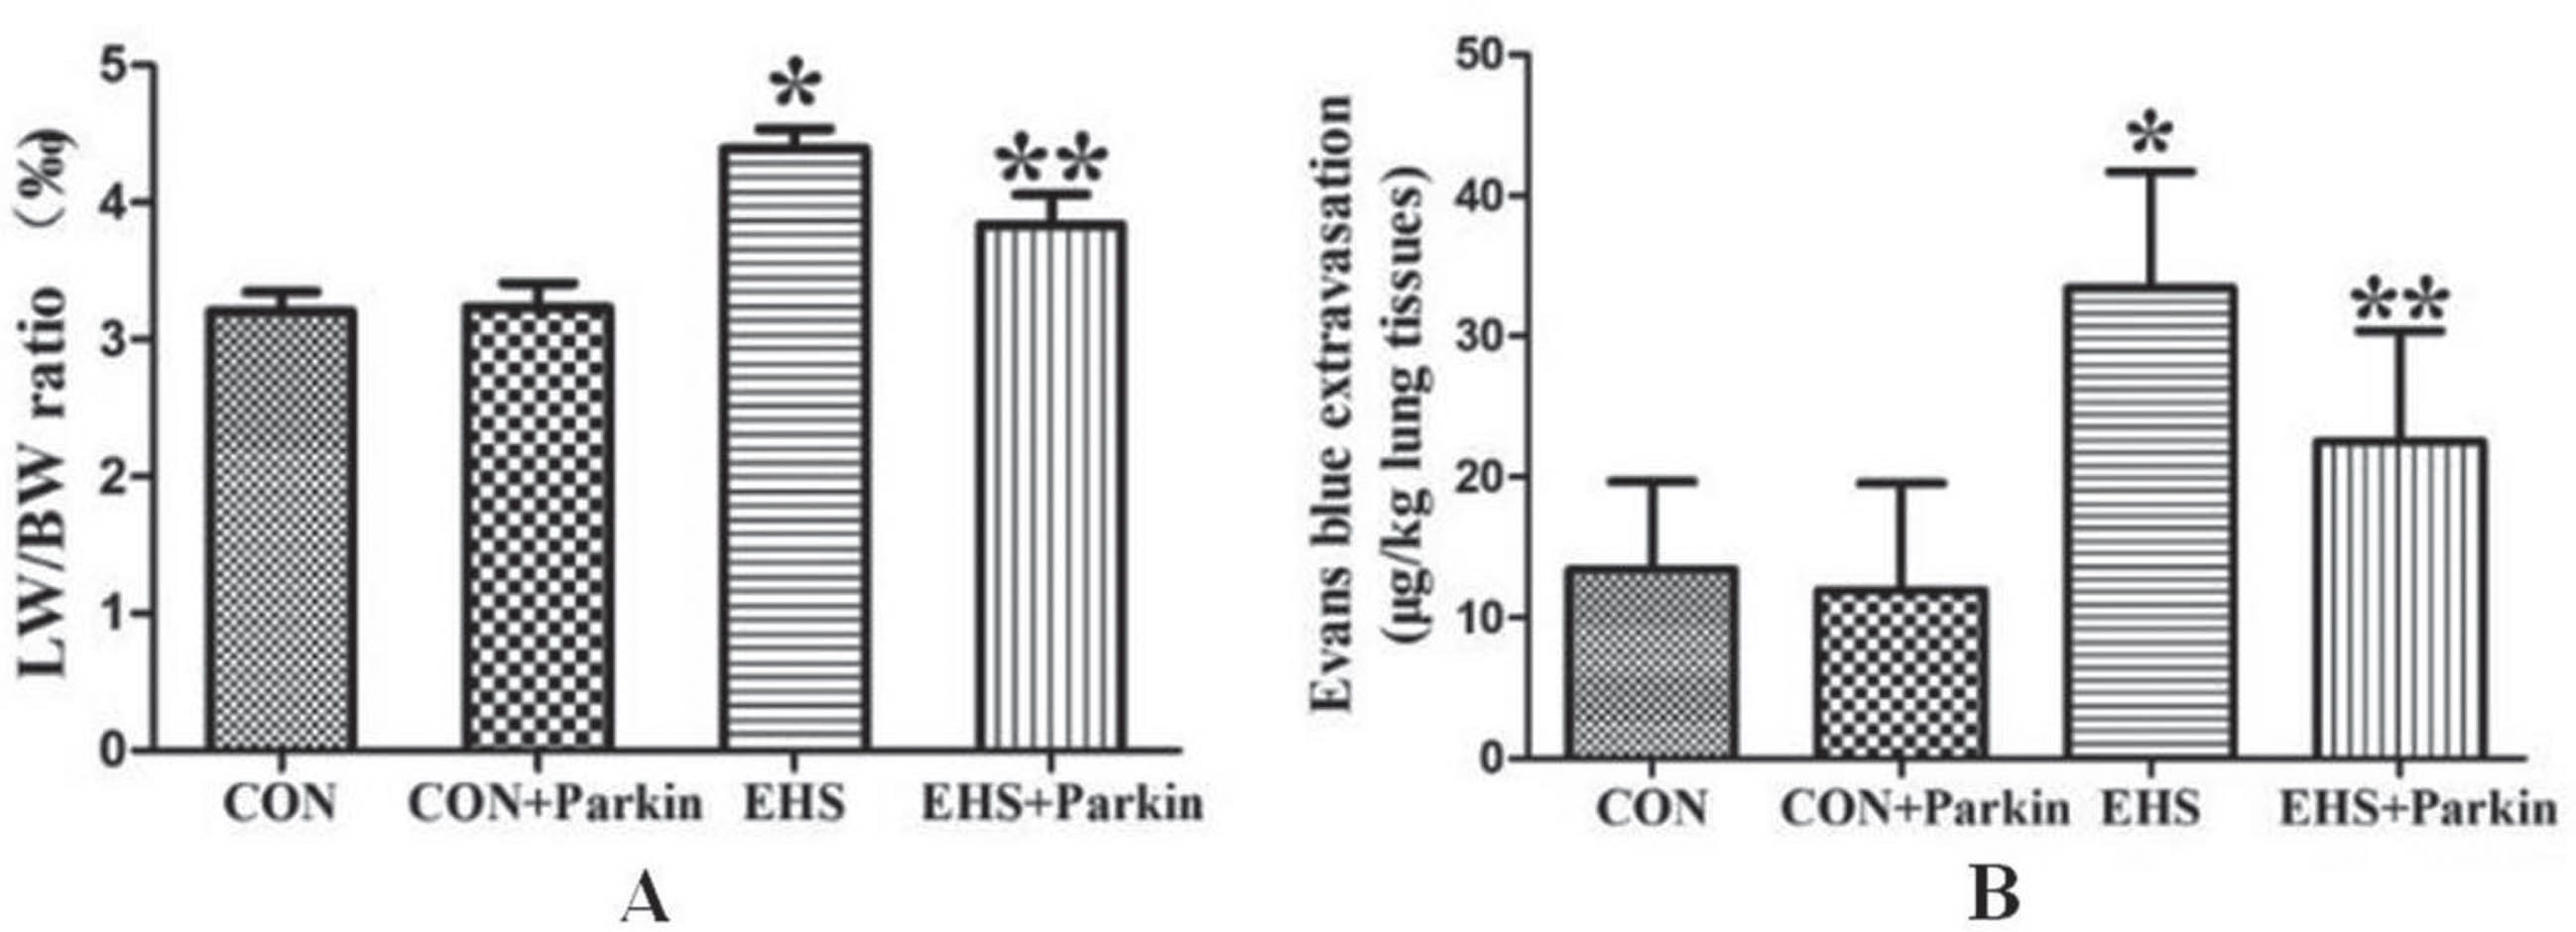 The over-expression of Parkin decreased the pulmonary index and vascular permeability of HS rats (N = 5). A: CON group; B: CON + Parkin group; C: EHS group; D: EHS + Parkin group.